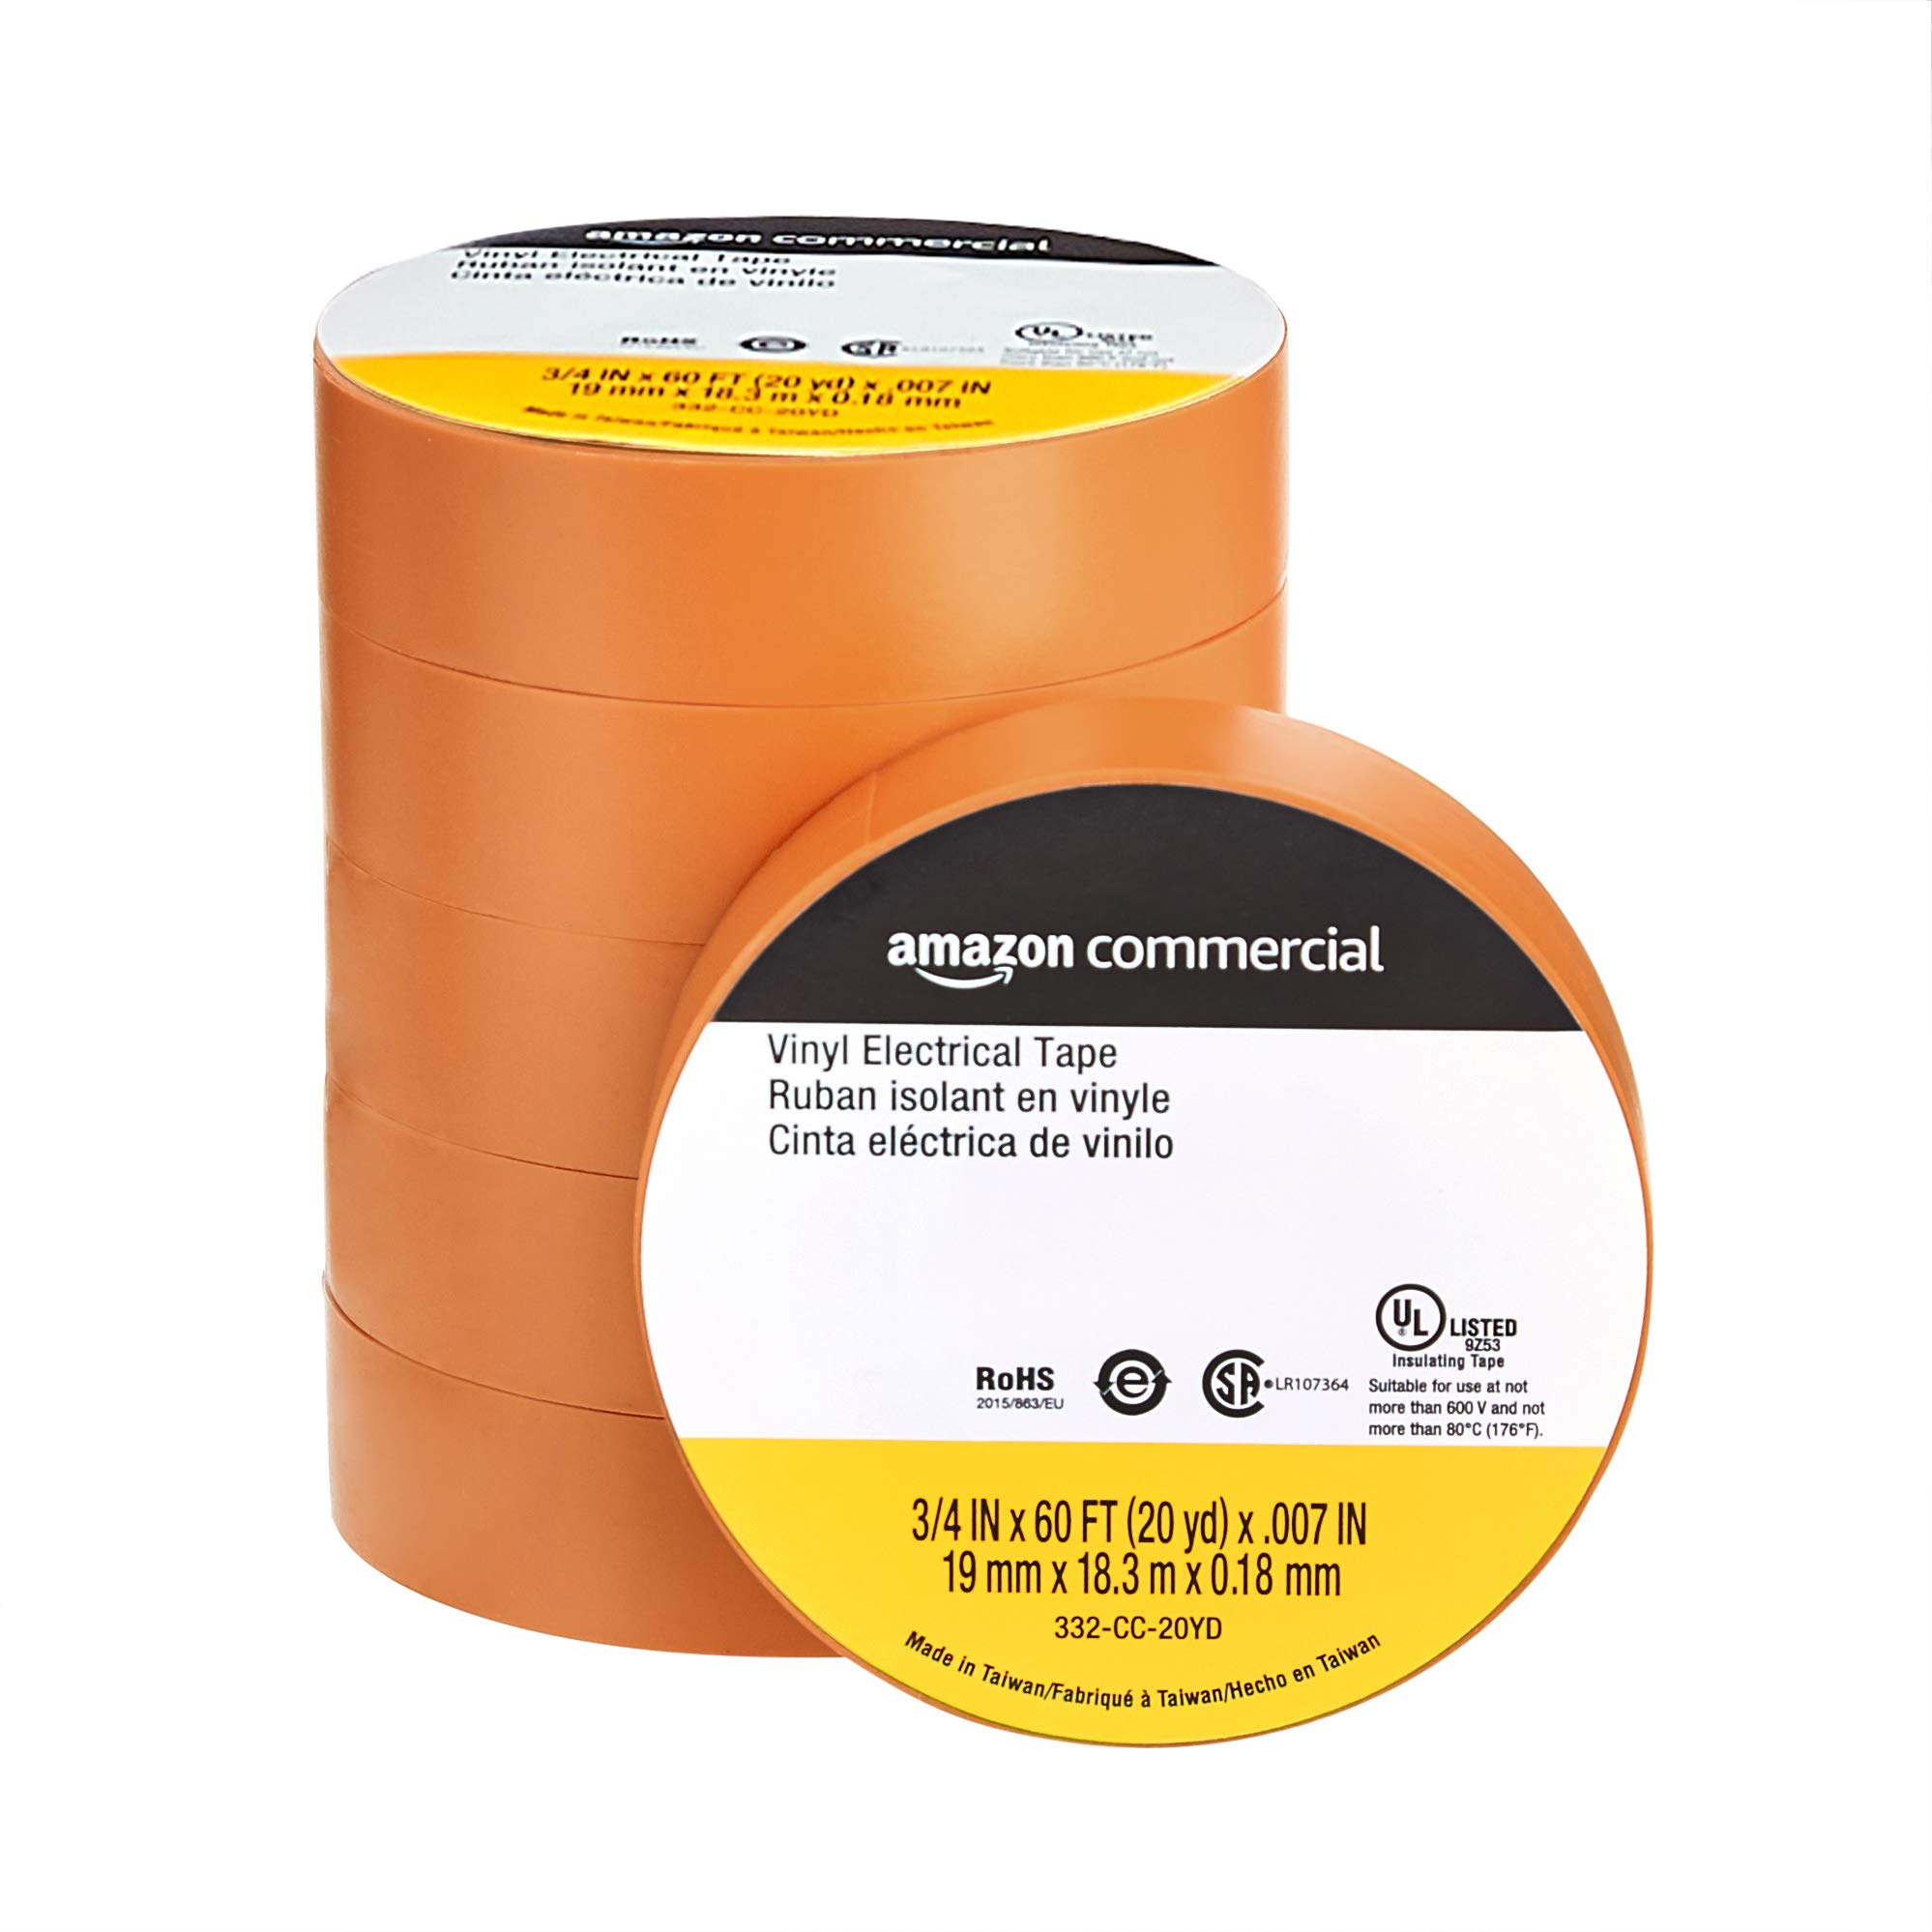 6-Pack AmazonCommercial Vinyl Electrical Tape (Orange) $2.66 shipped w/ Prime